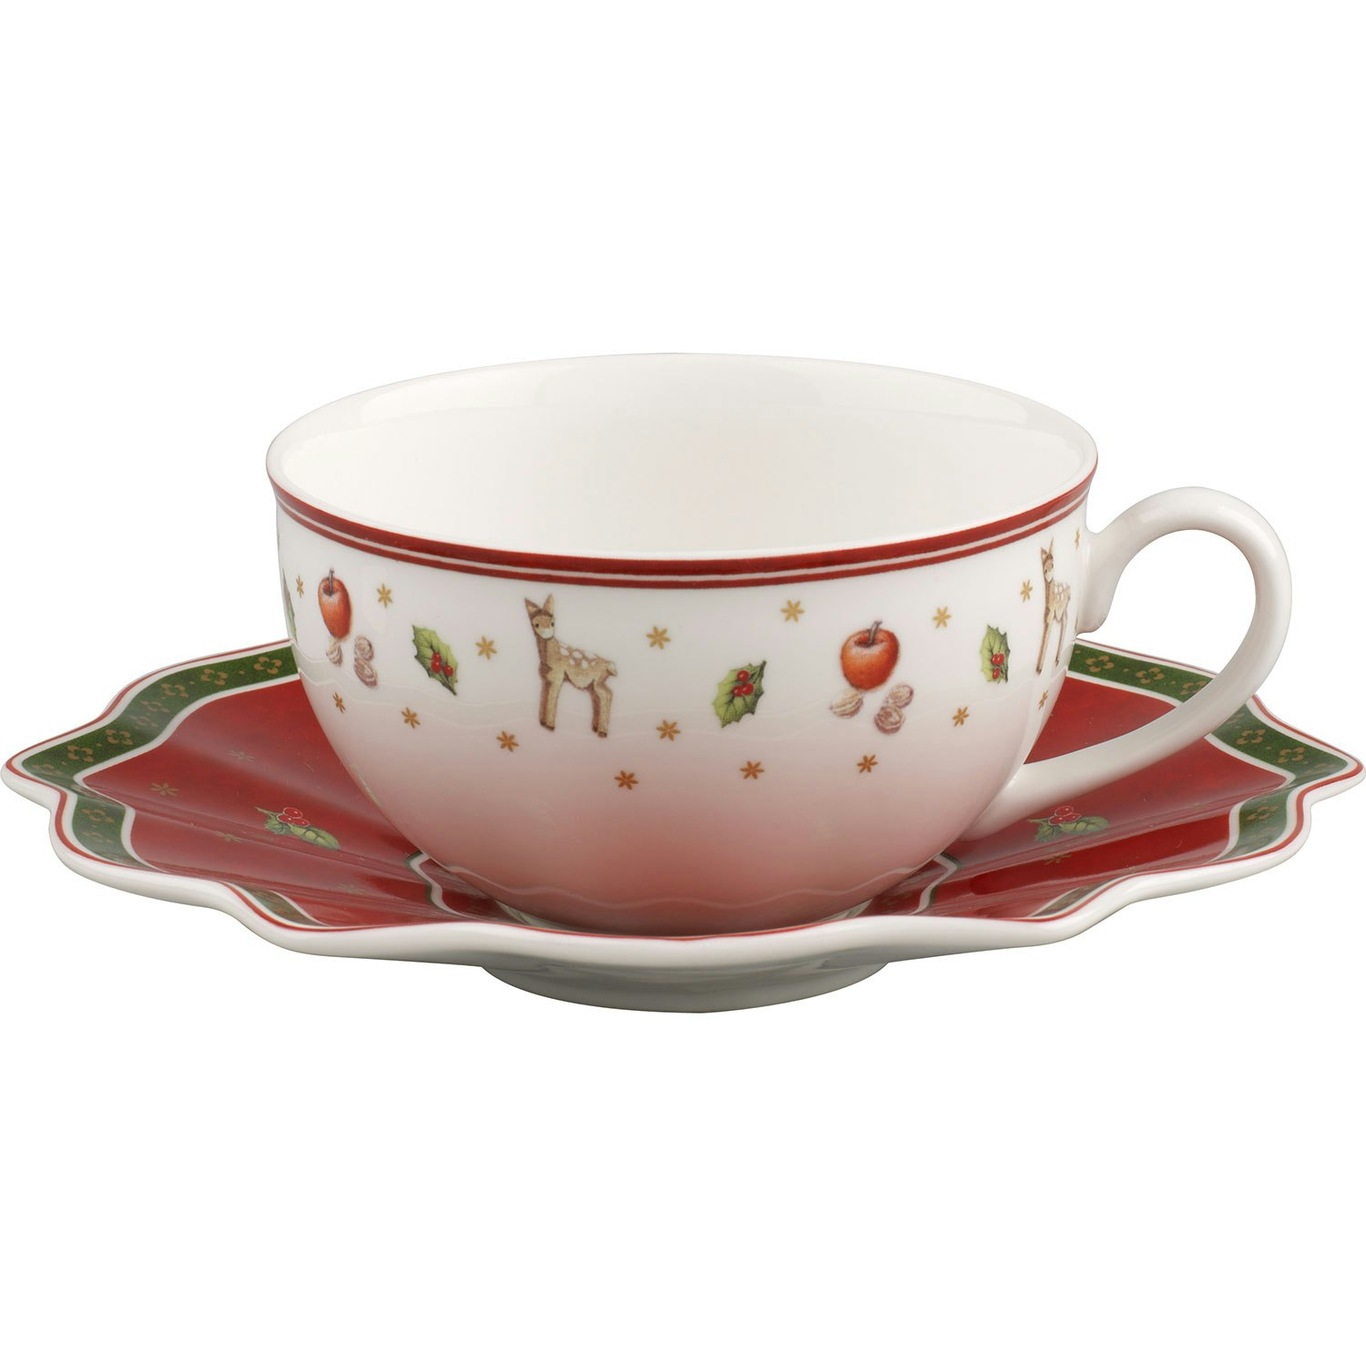 Toy's Delight Coffee Cup / Teacup With Platter 30 cl